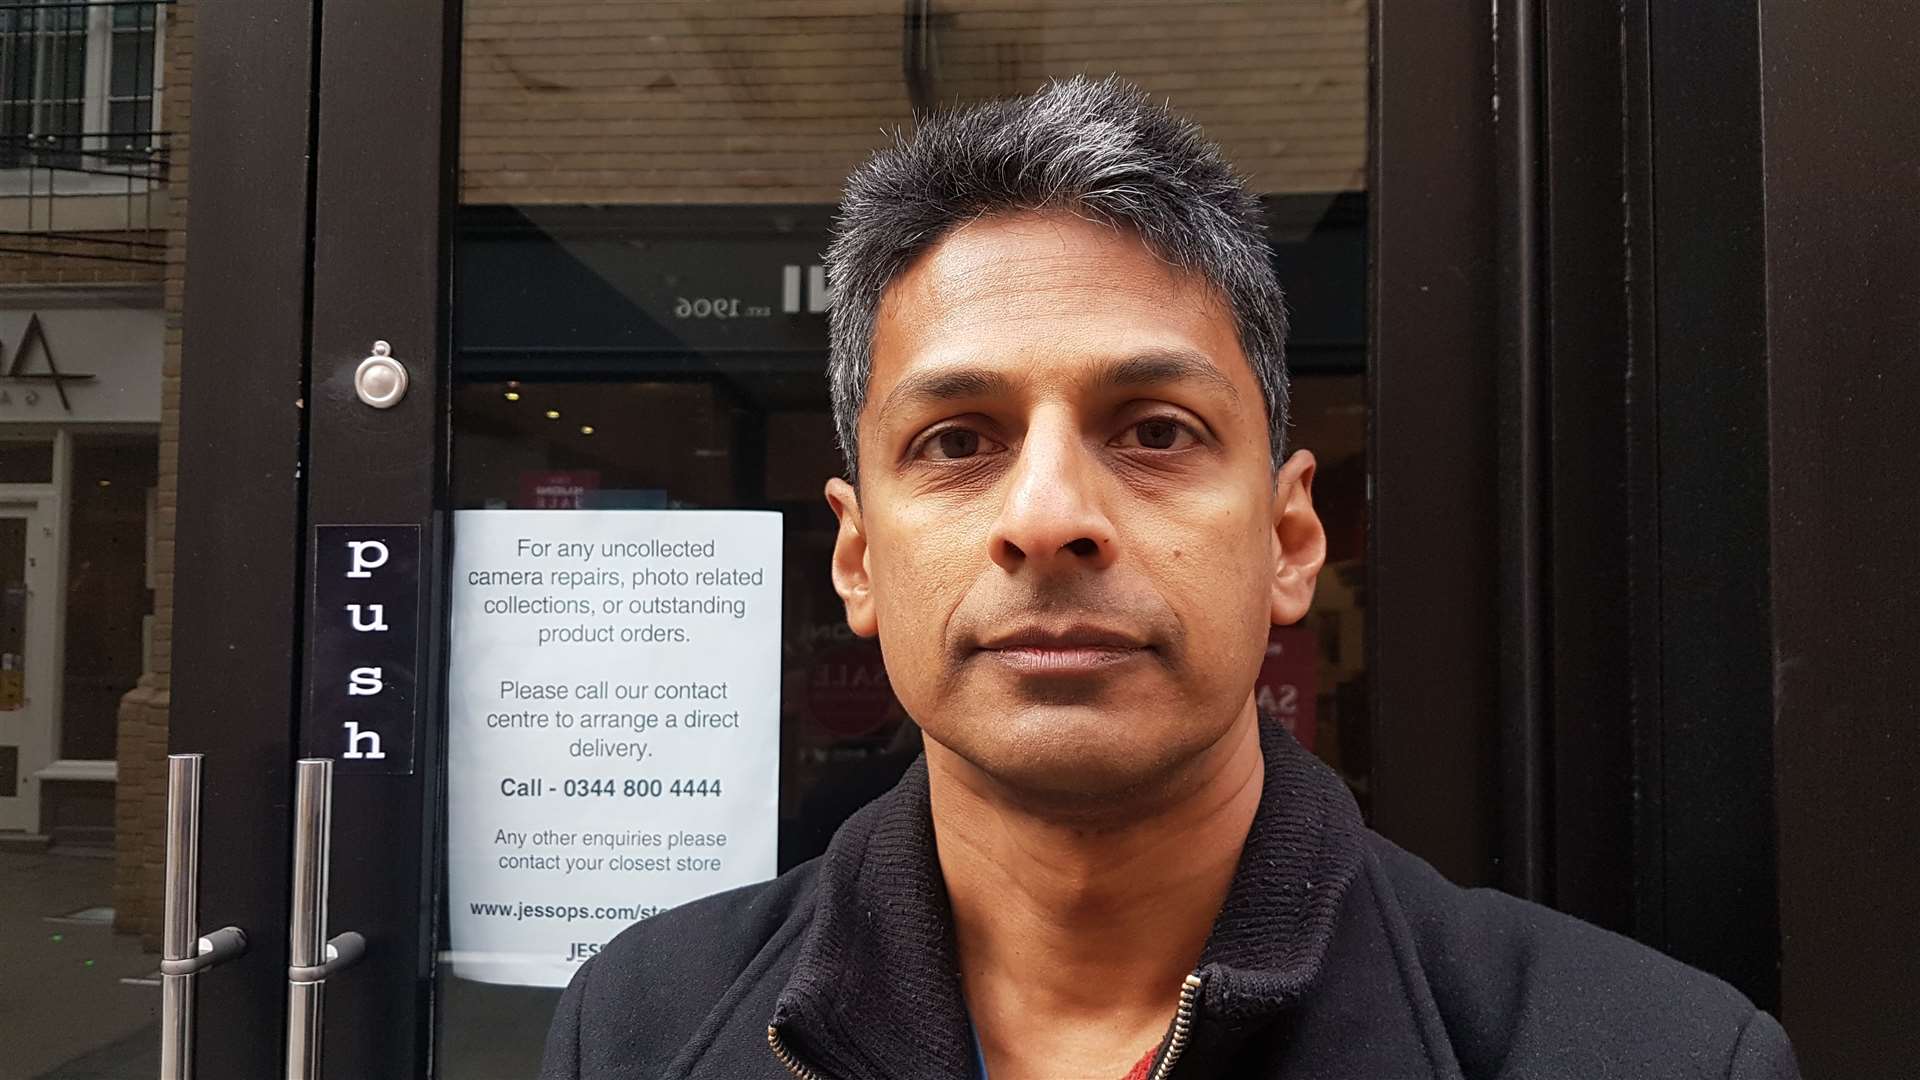 Mr Fernandes is sad following his store's closure